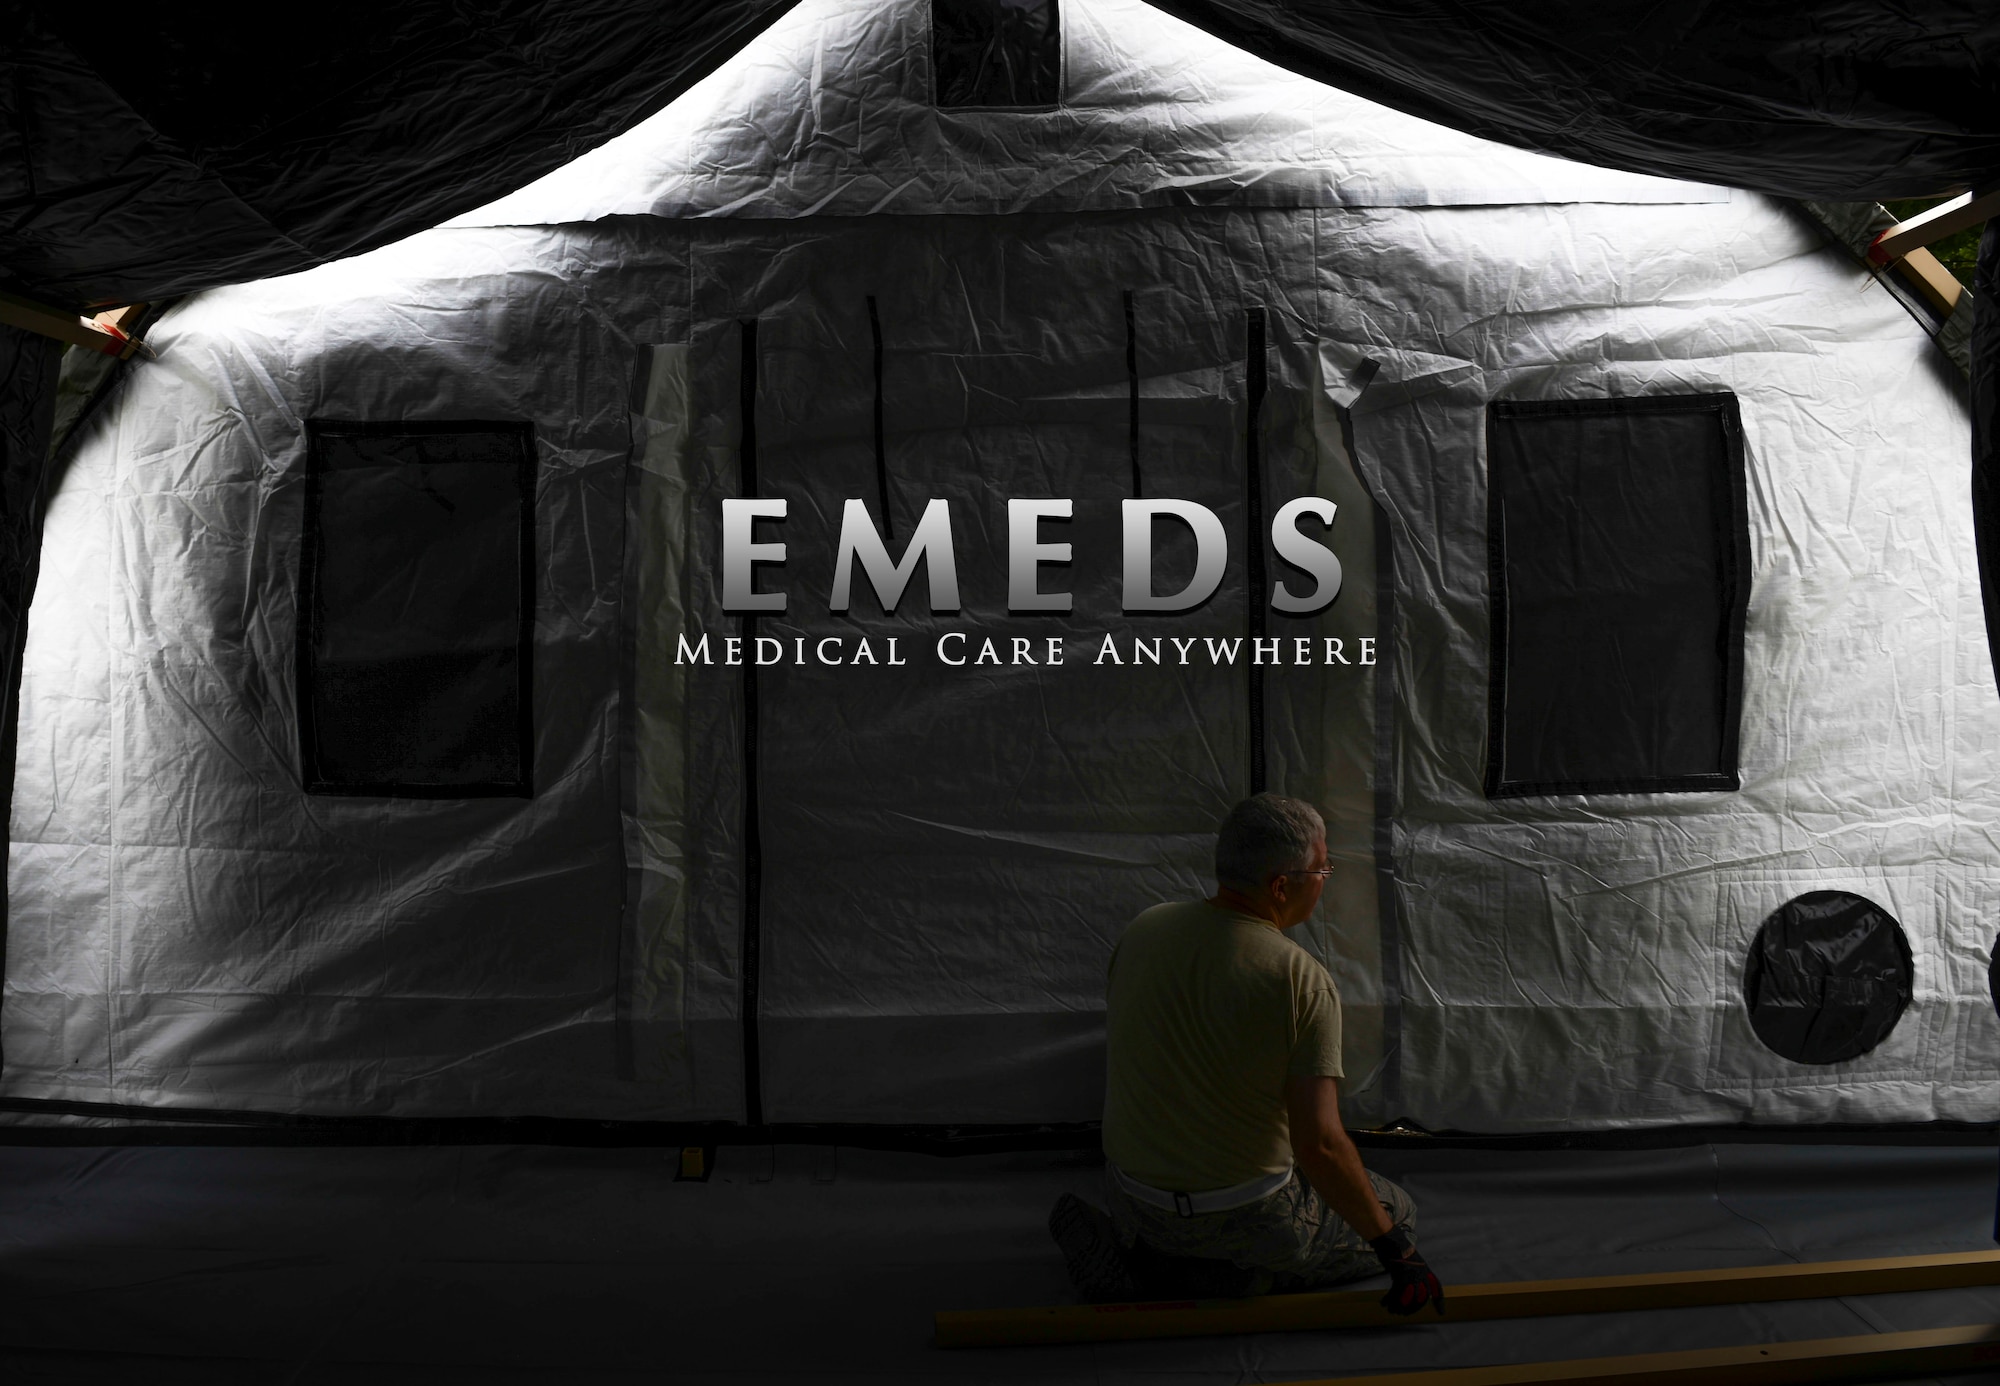 An Expeditionary Medical Support tent is nearing completion during an exercise at Yokota Air Base, Japan, May 14, 2014.  EMEDS tents have a fully functioning pharmacy, laboratory, dental and mental health clinics to treat patients. (U.S. Air Force graphic by Airman 1st Class Meagan Schutter/Released)